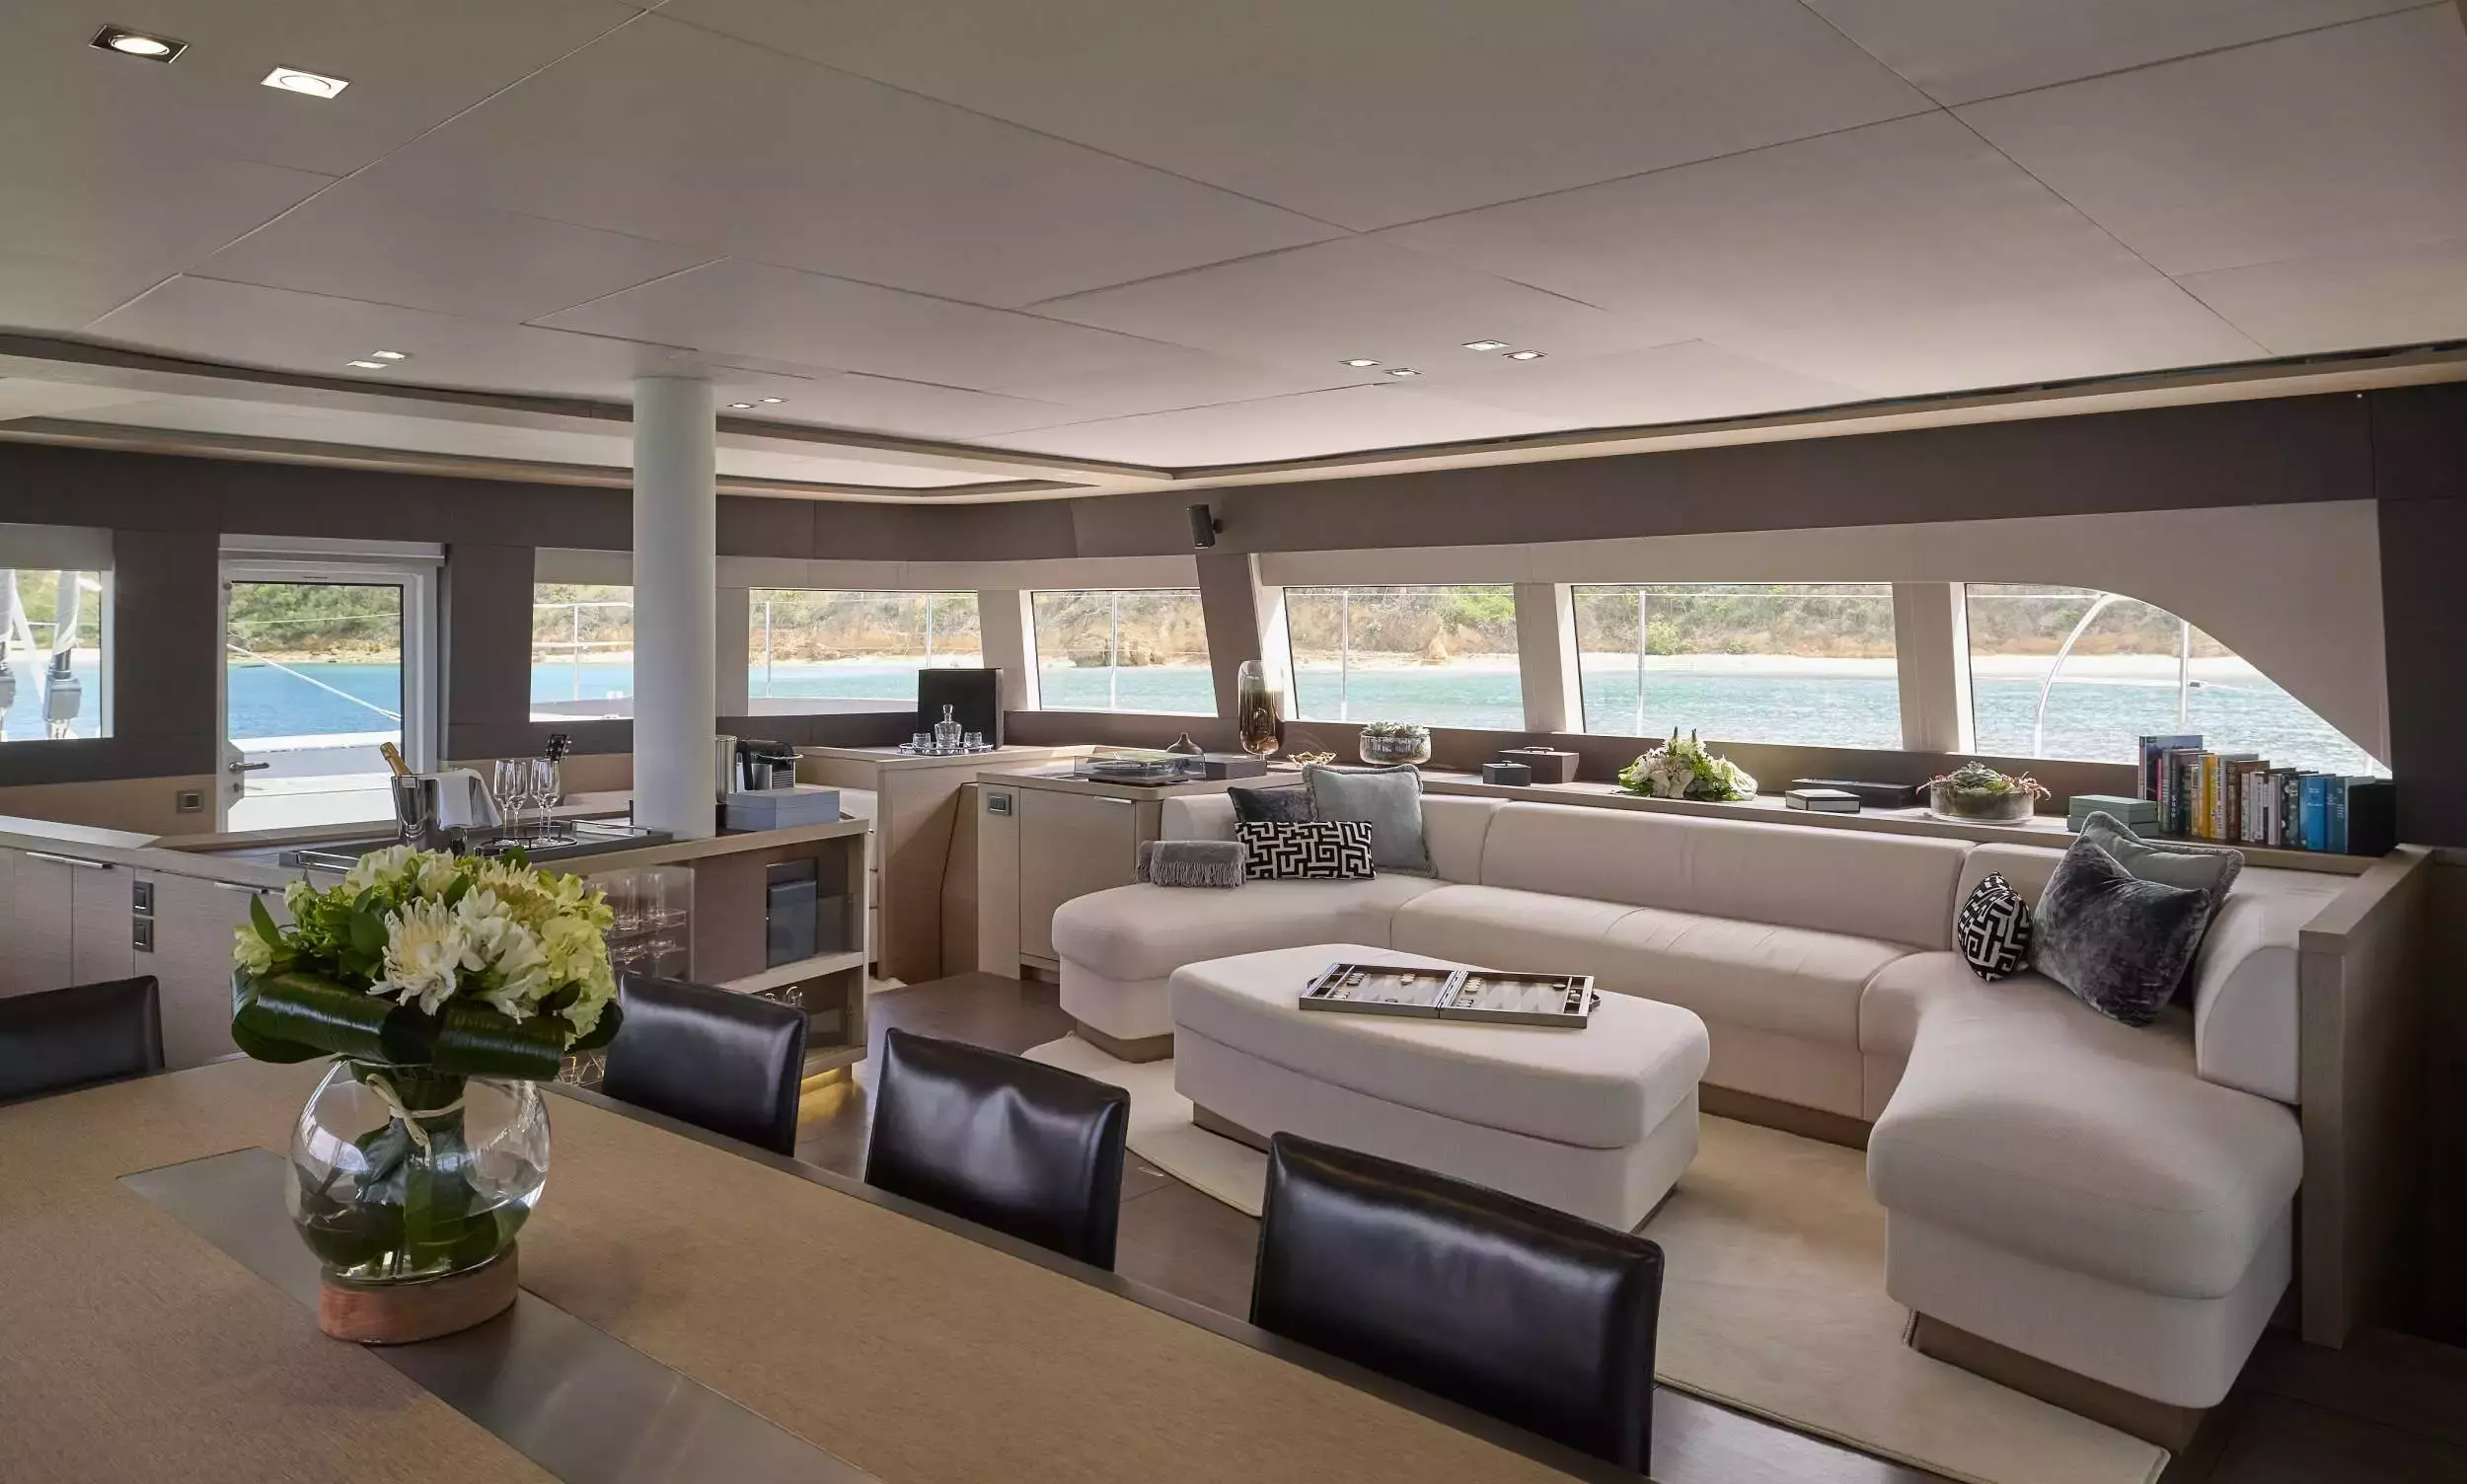 La Gatta by CNB Bordeaux - Top rates for a Charter of a private Luxury Catamaran in St Barths